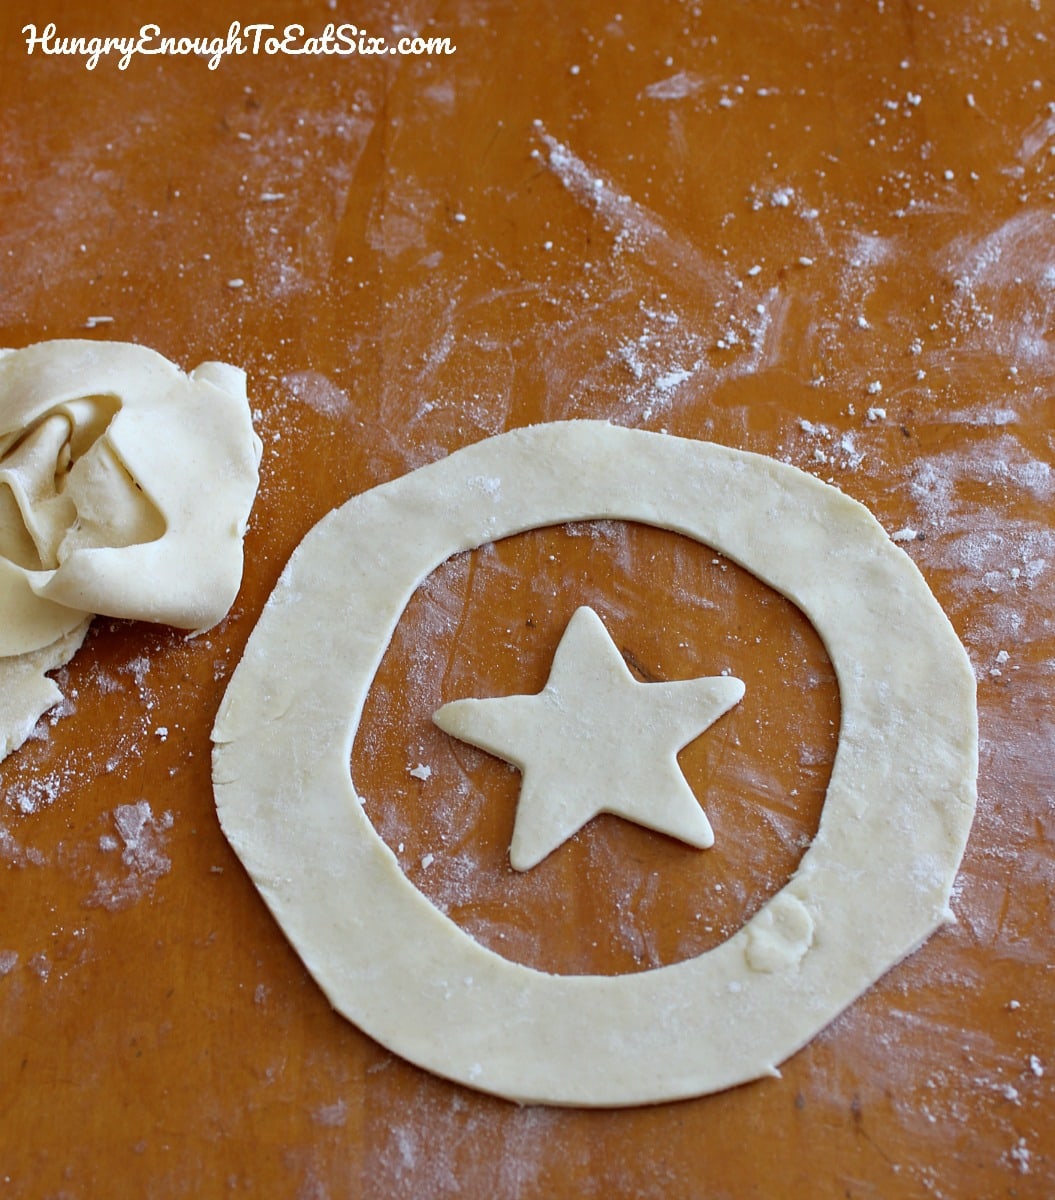 Ring and star cut from pastry dough